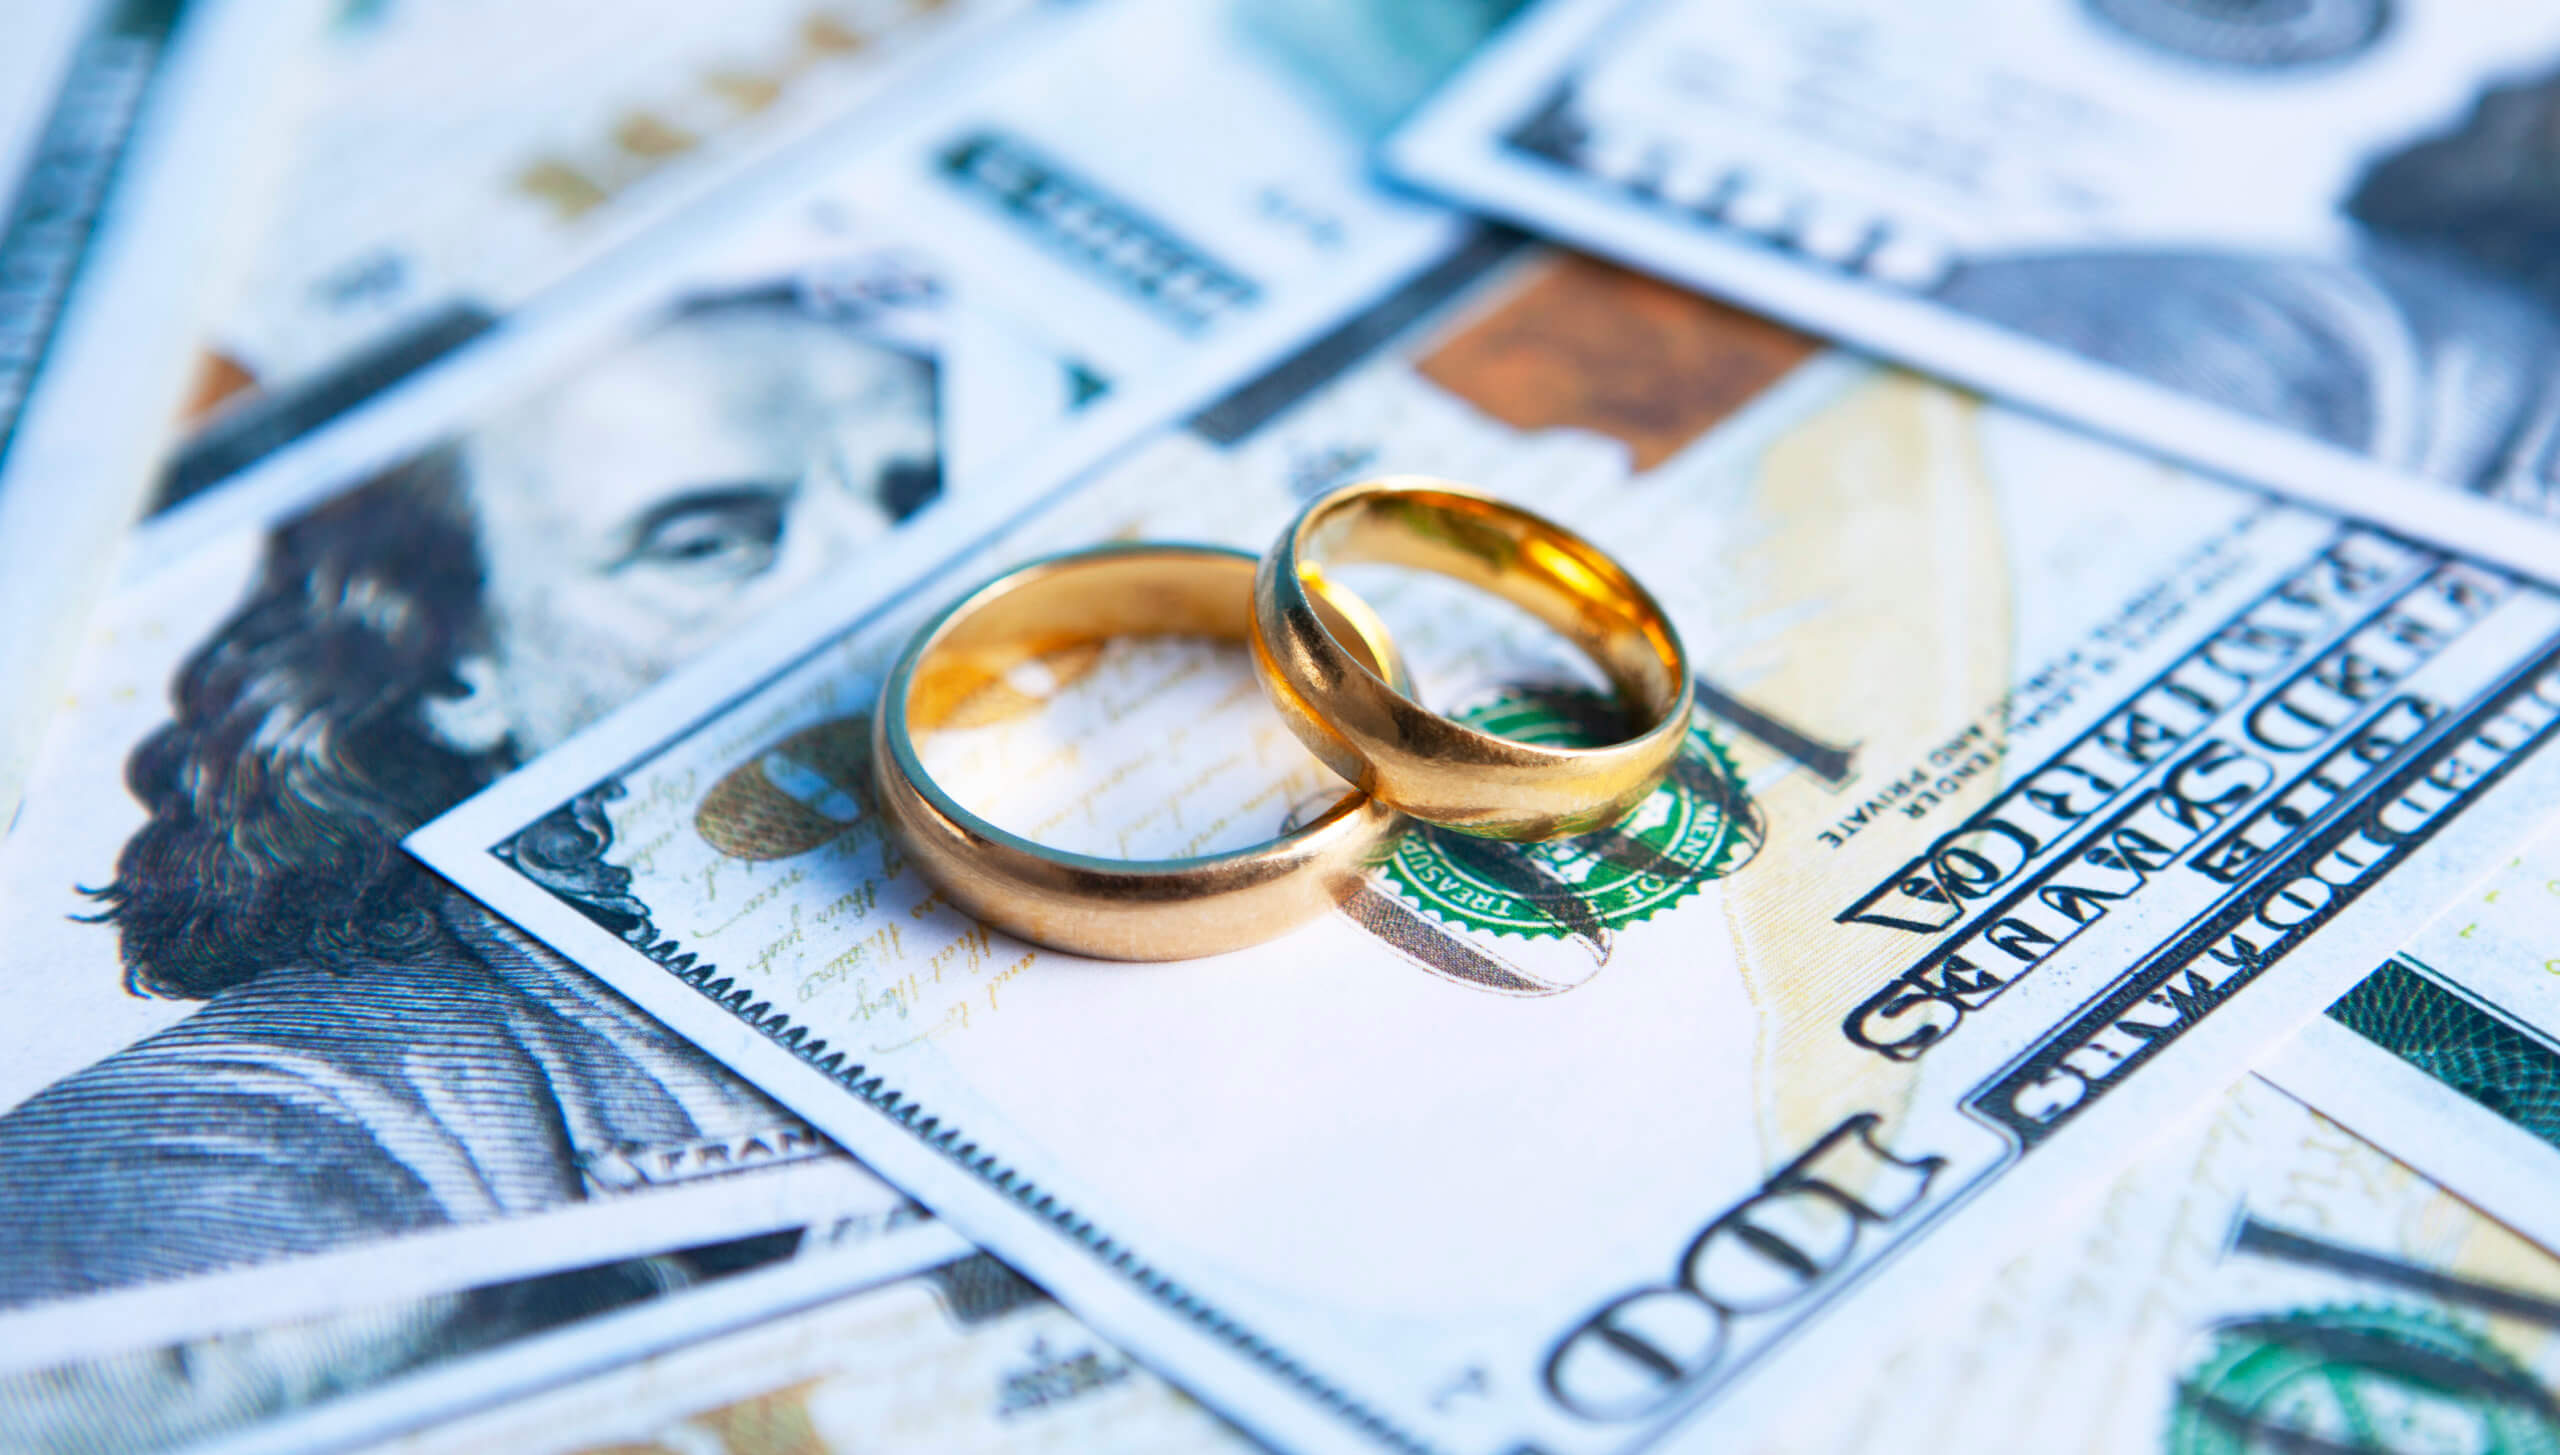 Steps To Prepare For A High Net Worth Divorce 